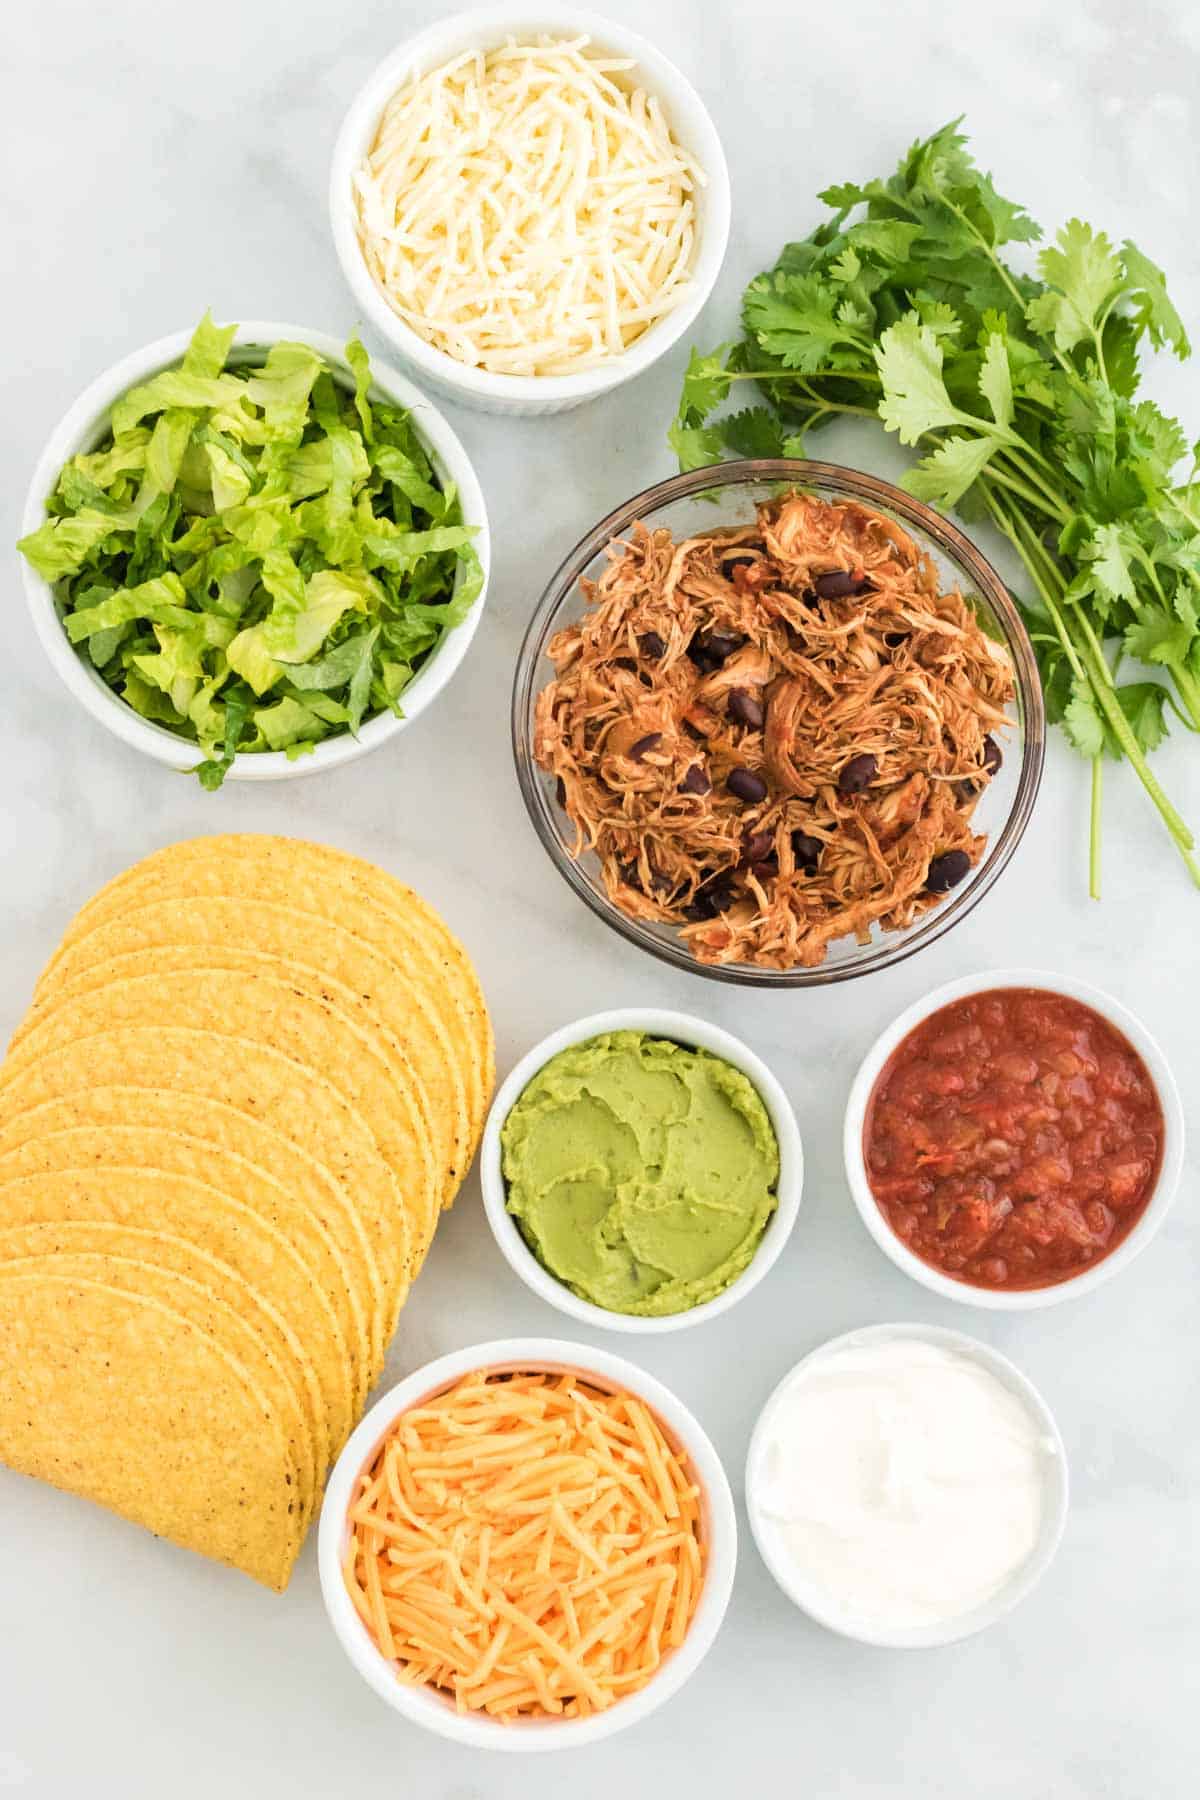 The ingredients for baked chicken tacos.